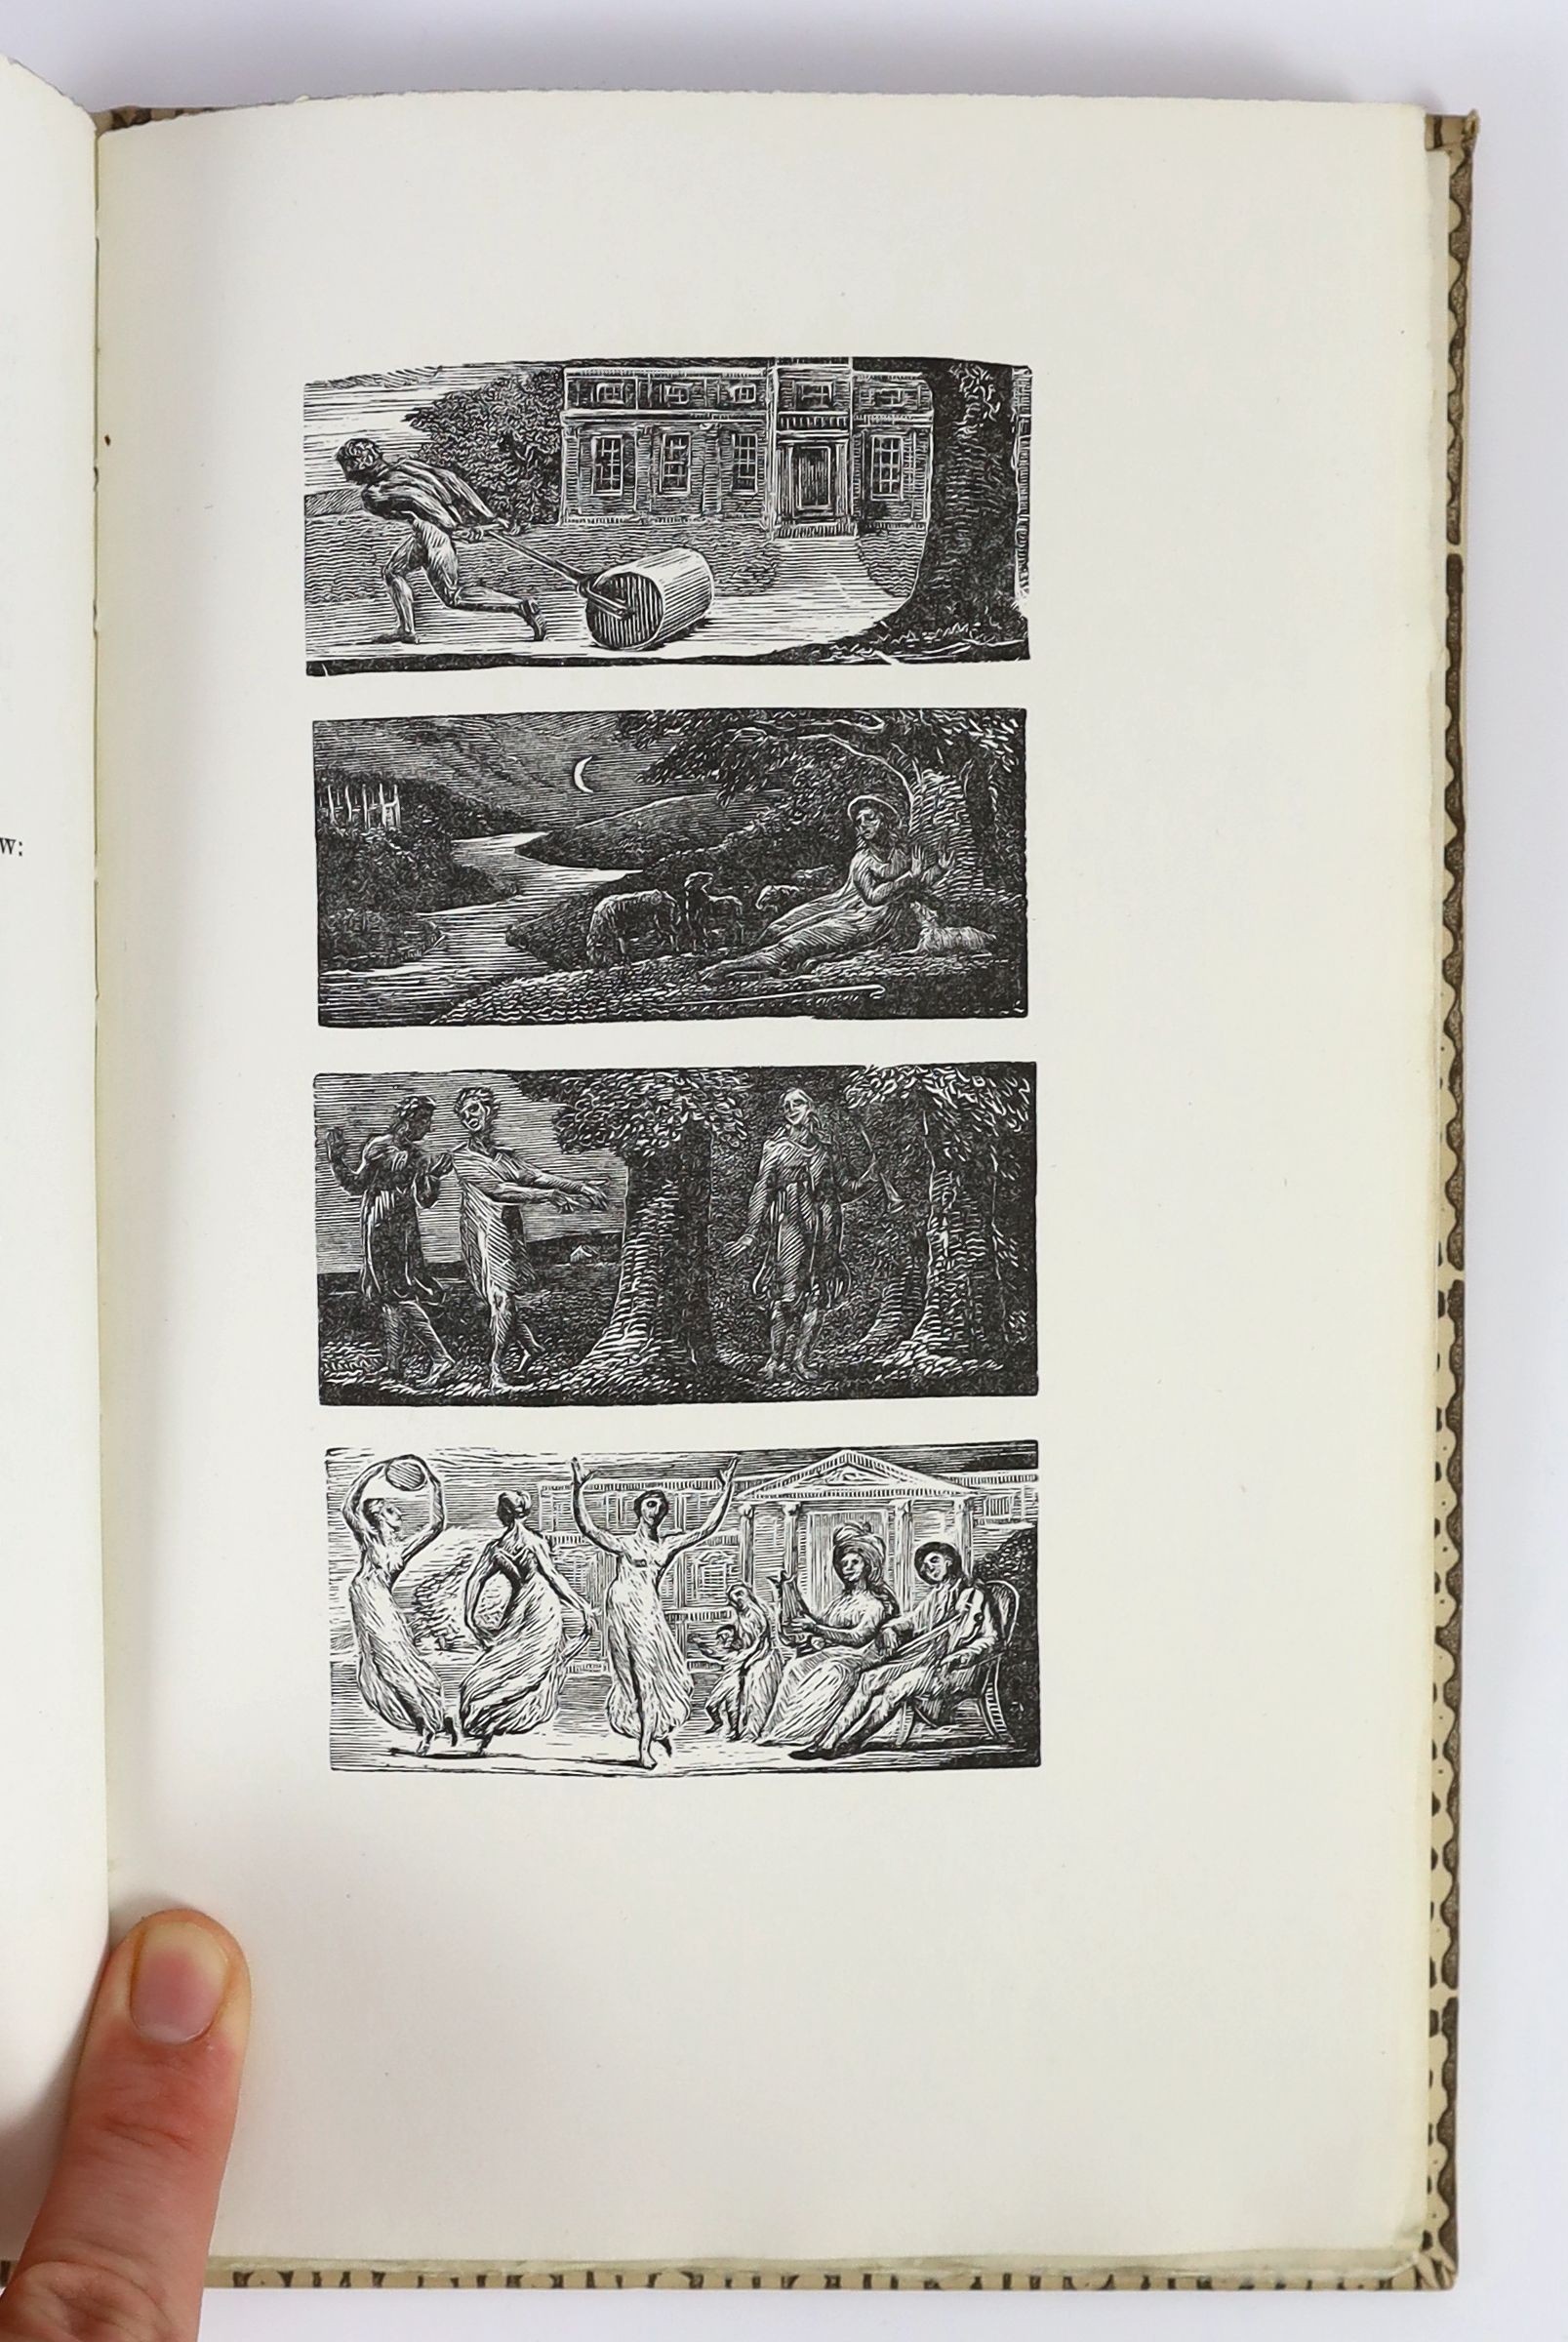 Nonesuch Press 4 works - Philips, Ambrose - The Illustrations of William Blake, one of 1000, 8vo, with a portfolio of 18 extra plates in a rear pocket, 1937; Blake, William - The Book of Thel, one of 850, Victor Gollancz